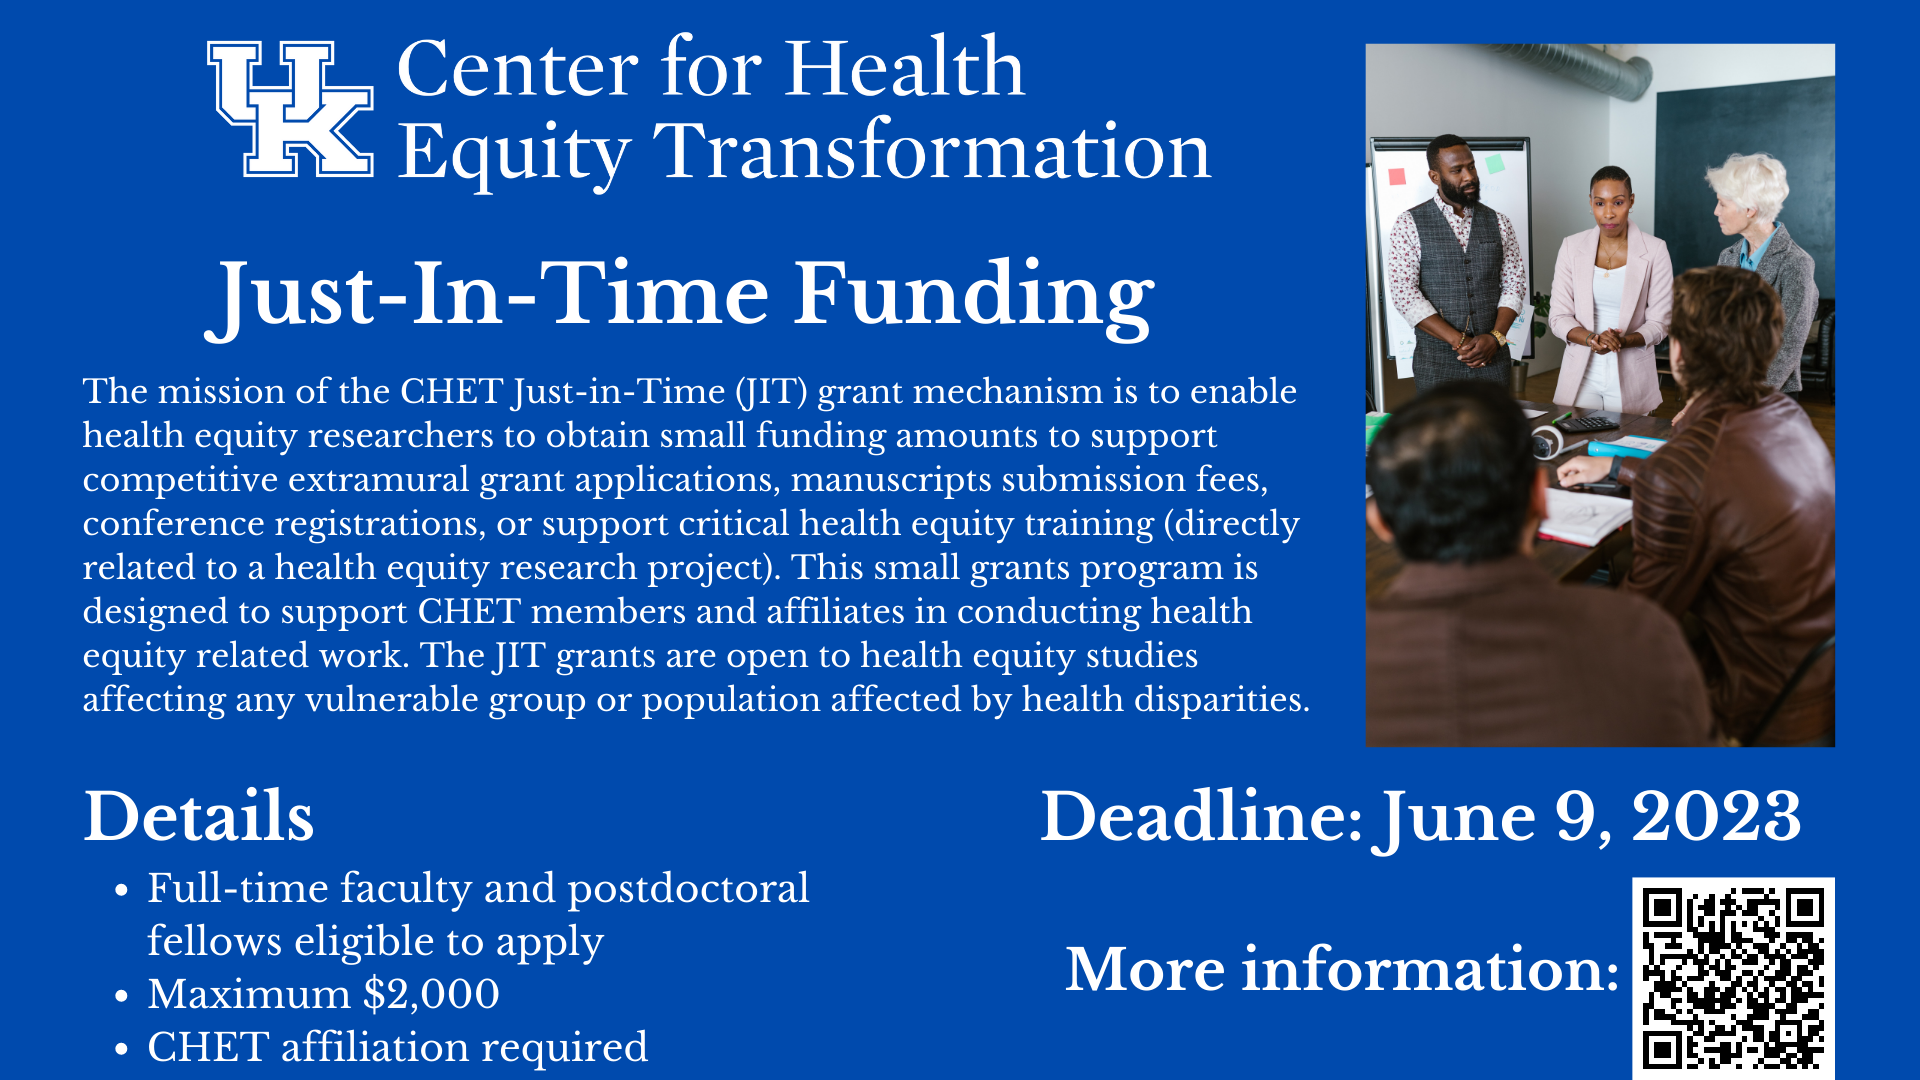 Flyer for Just-in-Time Funding Opportunity